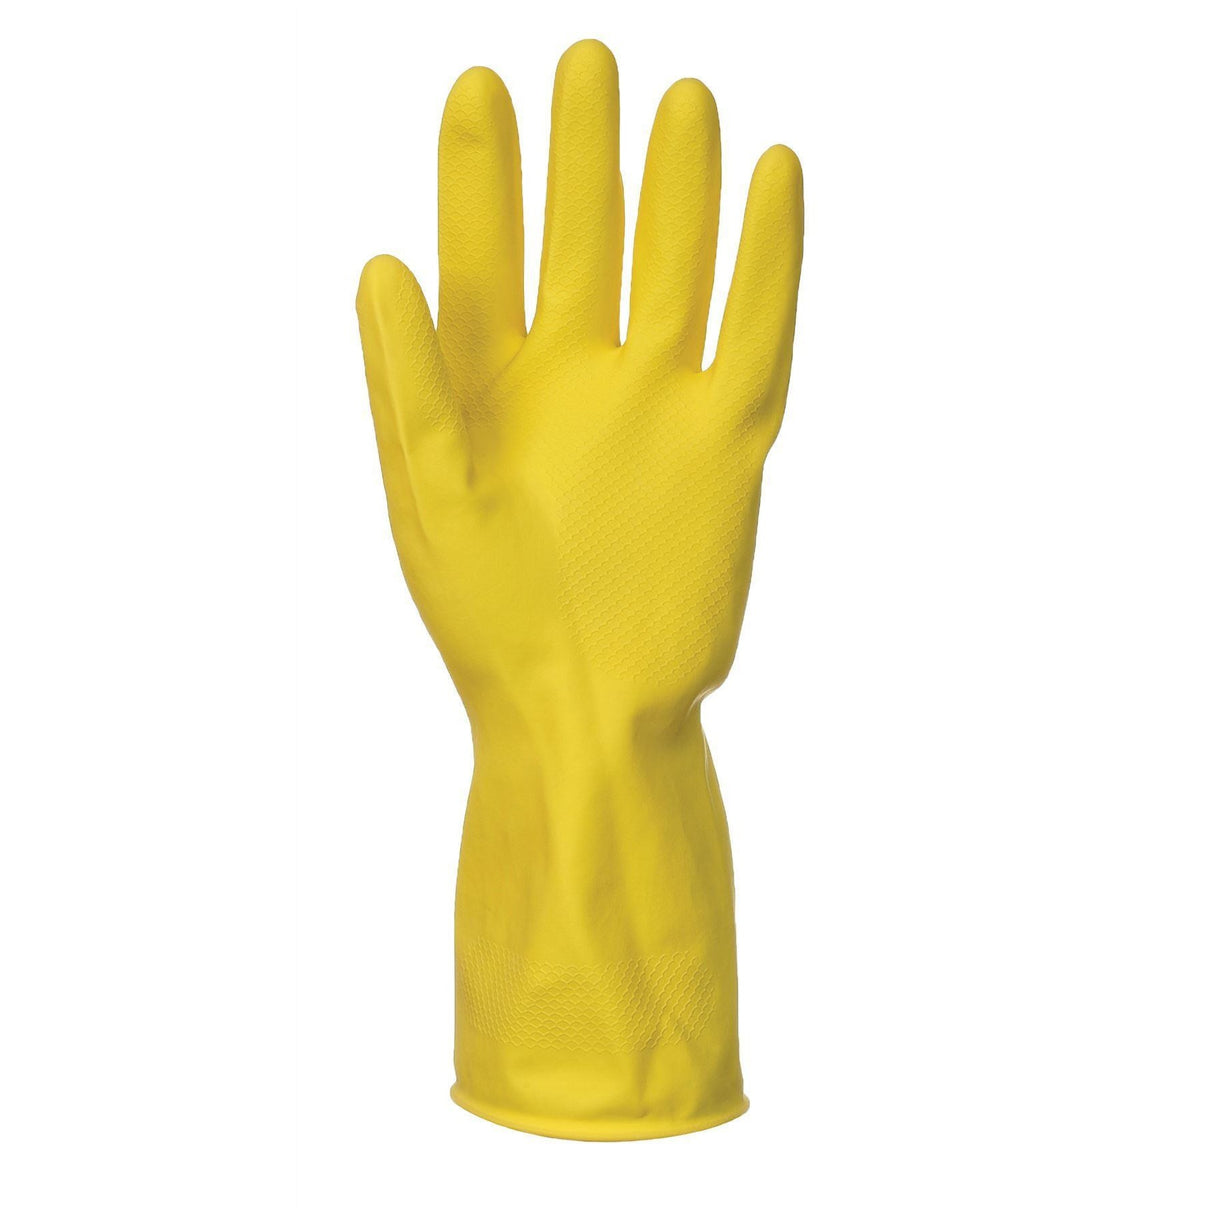 Portwest Household Latex Glove (Box of 240)